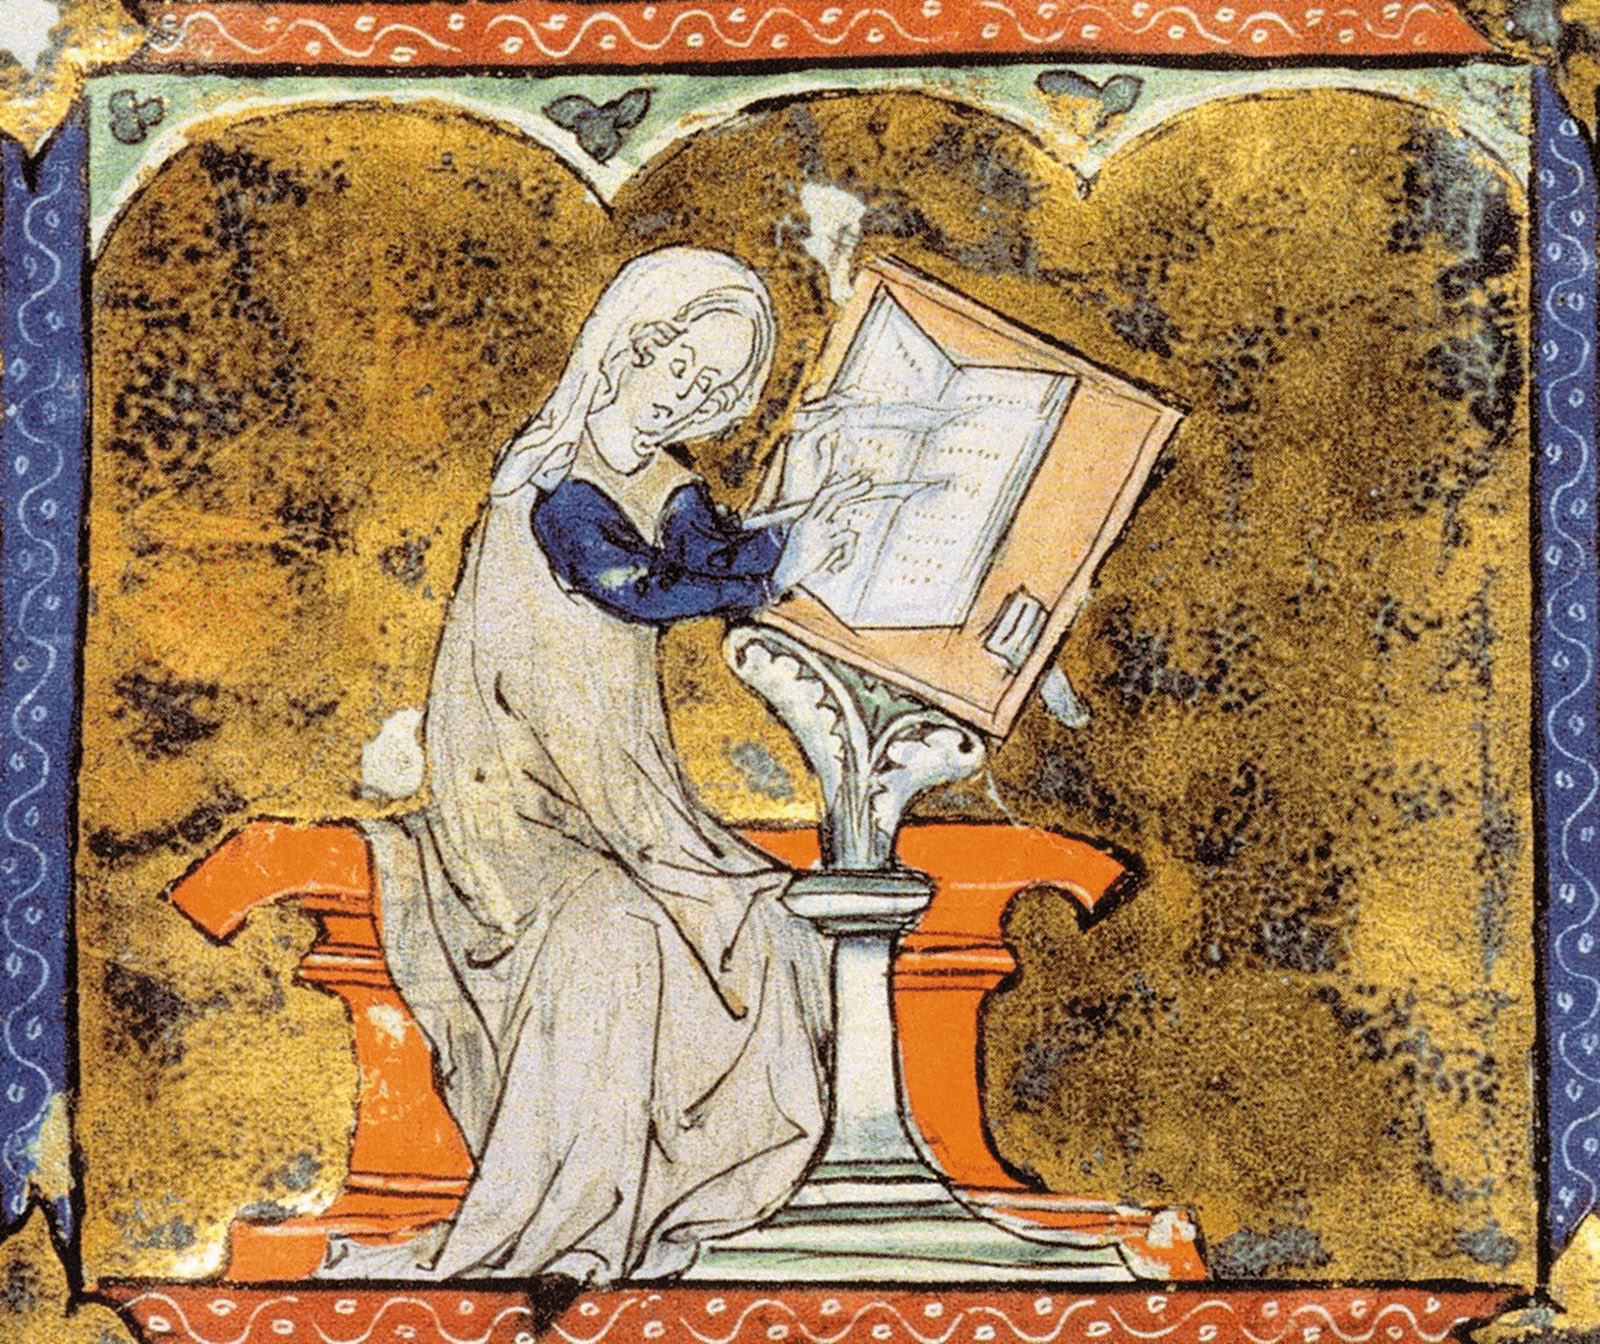 The writer Marie de France, who lived in England in the late twelfth and early thirteenth centuries, pictured in a collection of poems in old French, from an illuminated manuscript copied in Paris circa 1285–1292